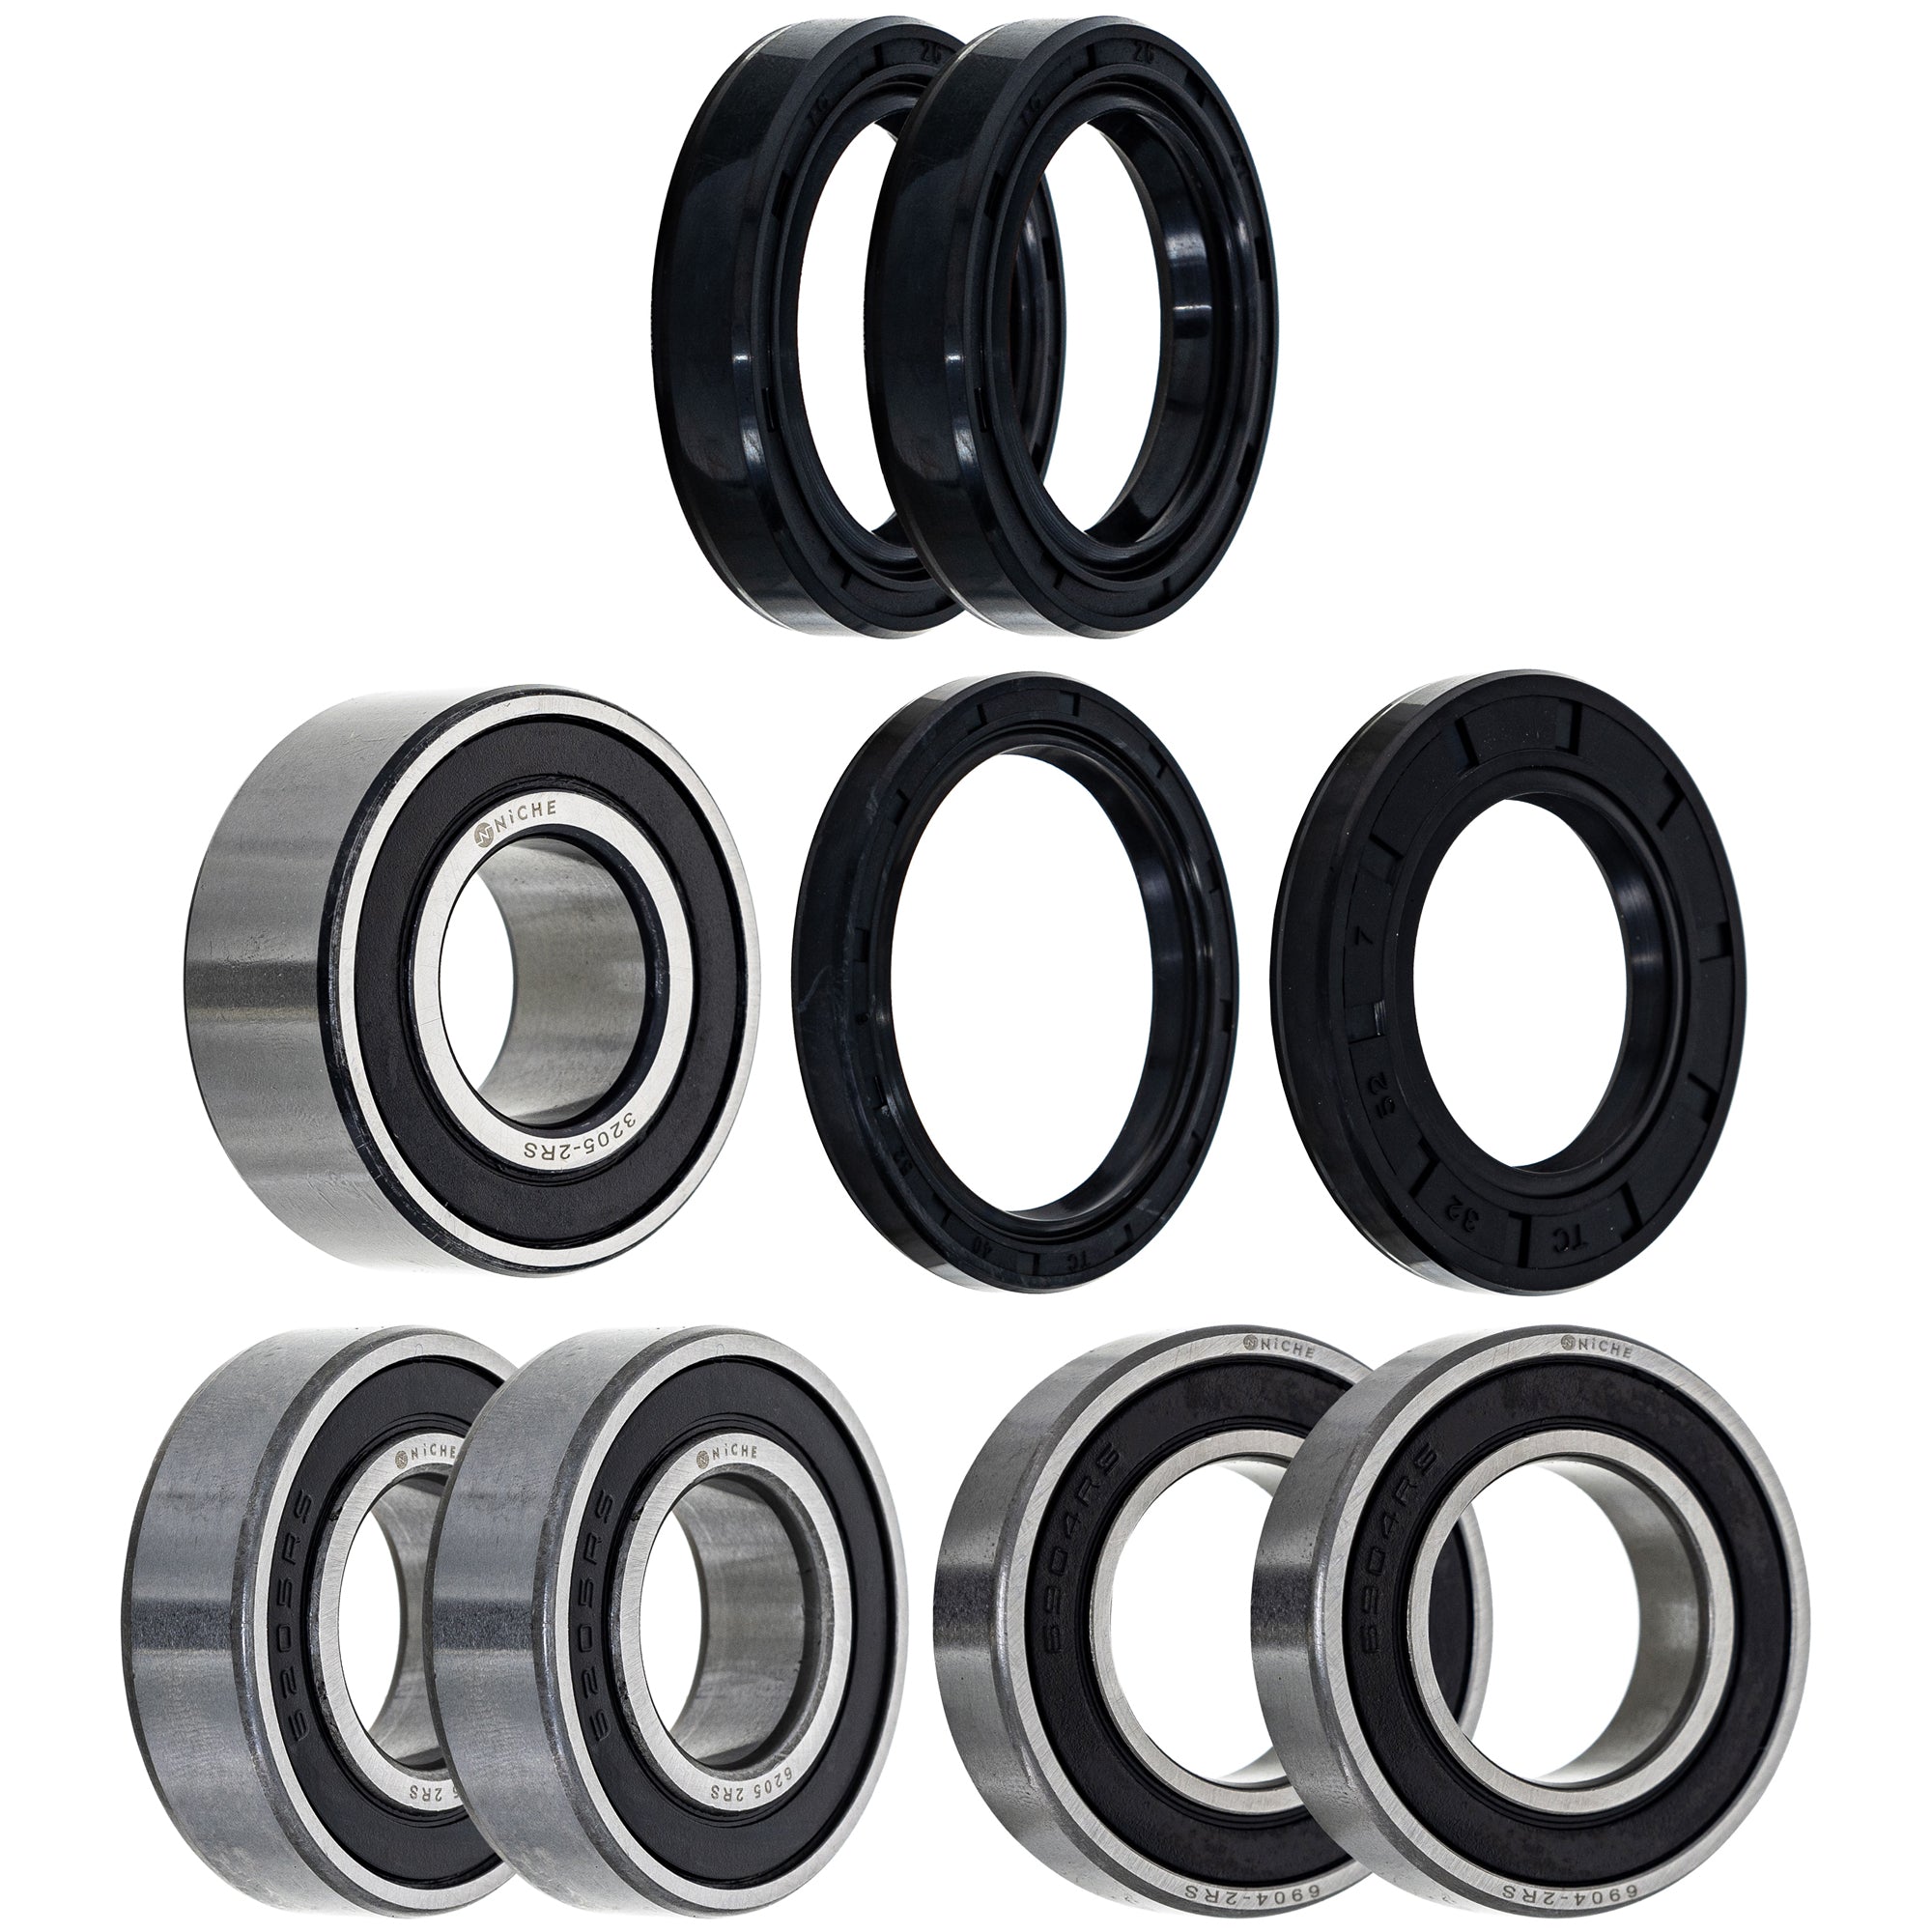 Wheel Bearing Seal Kit for zOTHER Ref No 640 400 NICHE MK1008677